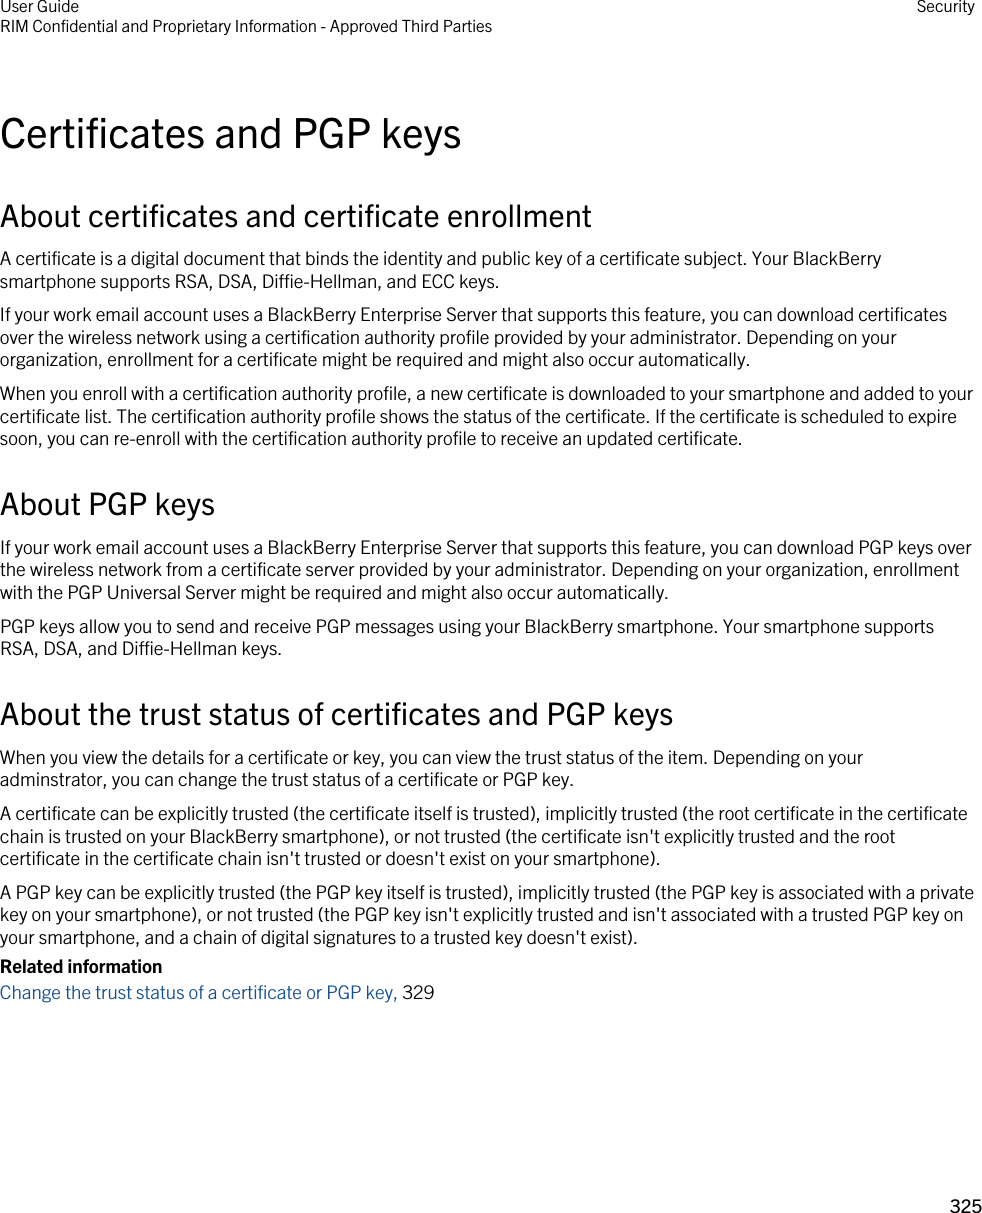 Certificates and PGP keysAbout certificates and certificate enrollmentA certificate is a digital document that binds the identity and public key of a certificate subject. Your BlackBerry smartphone supports RSA, DSA, Diffie-Hellman, and ECC keys.If your work email account uses a BlackBerry Enterprise Server that supports this feature, you can download certificates over the wireless network using a certification authority profile provided by your administrator. Depending on your organization, enrollment for a certificate might be required and might also occur automatically.When you enroll with a certification authority profile, a new certificate is downloaded to your smartphone and added to your certificate list. The certification authority profile shows the status of the certificate. If the certificate is scheduled to expire soon, you can re-enroll with the certification authority profile to receive an updated certificate.About PGP keysIf your work email account uses a BlackBerry Enterprise Server that supports this feature, you can download PGP keys over the wireless network from a certificate server provided by your administrator. Depending on your organization, enrollment with the PGP Universal Server might be required and might also occur automatically.PGP keys allow you to send and receive PGP messages using your BlackBerry smartphone. Your smartphone supports RSA, DSA, and Diffie-Hellman keys.About the trust status of certificates and PGP keysWhen you view the details for a certificate or key, you can view the trust status of the item. Depending on your adminstrator, you can change the trust status of a certificate or PGP key.A certificate can be explicitly trusted (the certificate itself is trusted), implicitly trusted (the root certificate in the certificate chain is trusted on your BlackBerry smartphone), or not trusted (the certificate isn&apos;t explicitly trusted and the root certificate in the certificate chain isn&apos;t trusted or doesn&apos;t exist on your smartphone).A PGP key can be explicitly trusted (the PGP key itself is trusted), implicitly trusted (the PGP key is associated with a private key on your smartphone), or not trusted (the PGP key isn&apos;t explicitly trusted and isn&apos;t associated with a trusted PGP key on your smartphone, and a chain of digital signatures to a trusted key doesn&apos;t exist).Related informationChange the trust status of a certificate or PGP key, 329User GuideRIM Confidential and Proprietary Information - Approved Third Parties Security325 